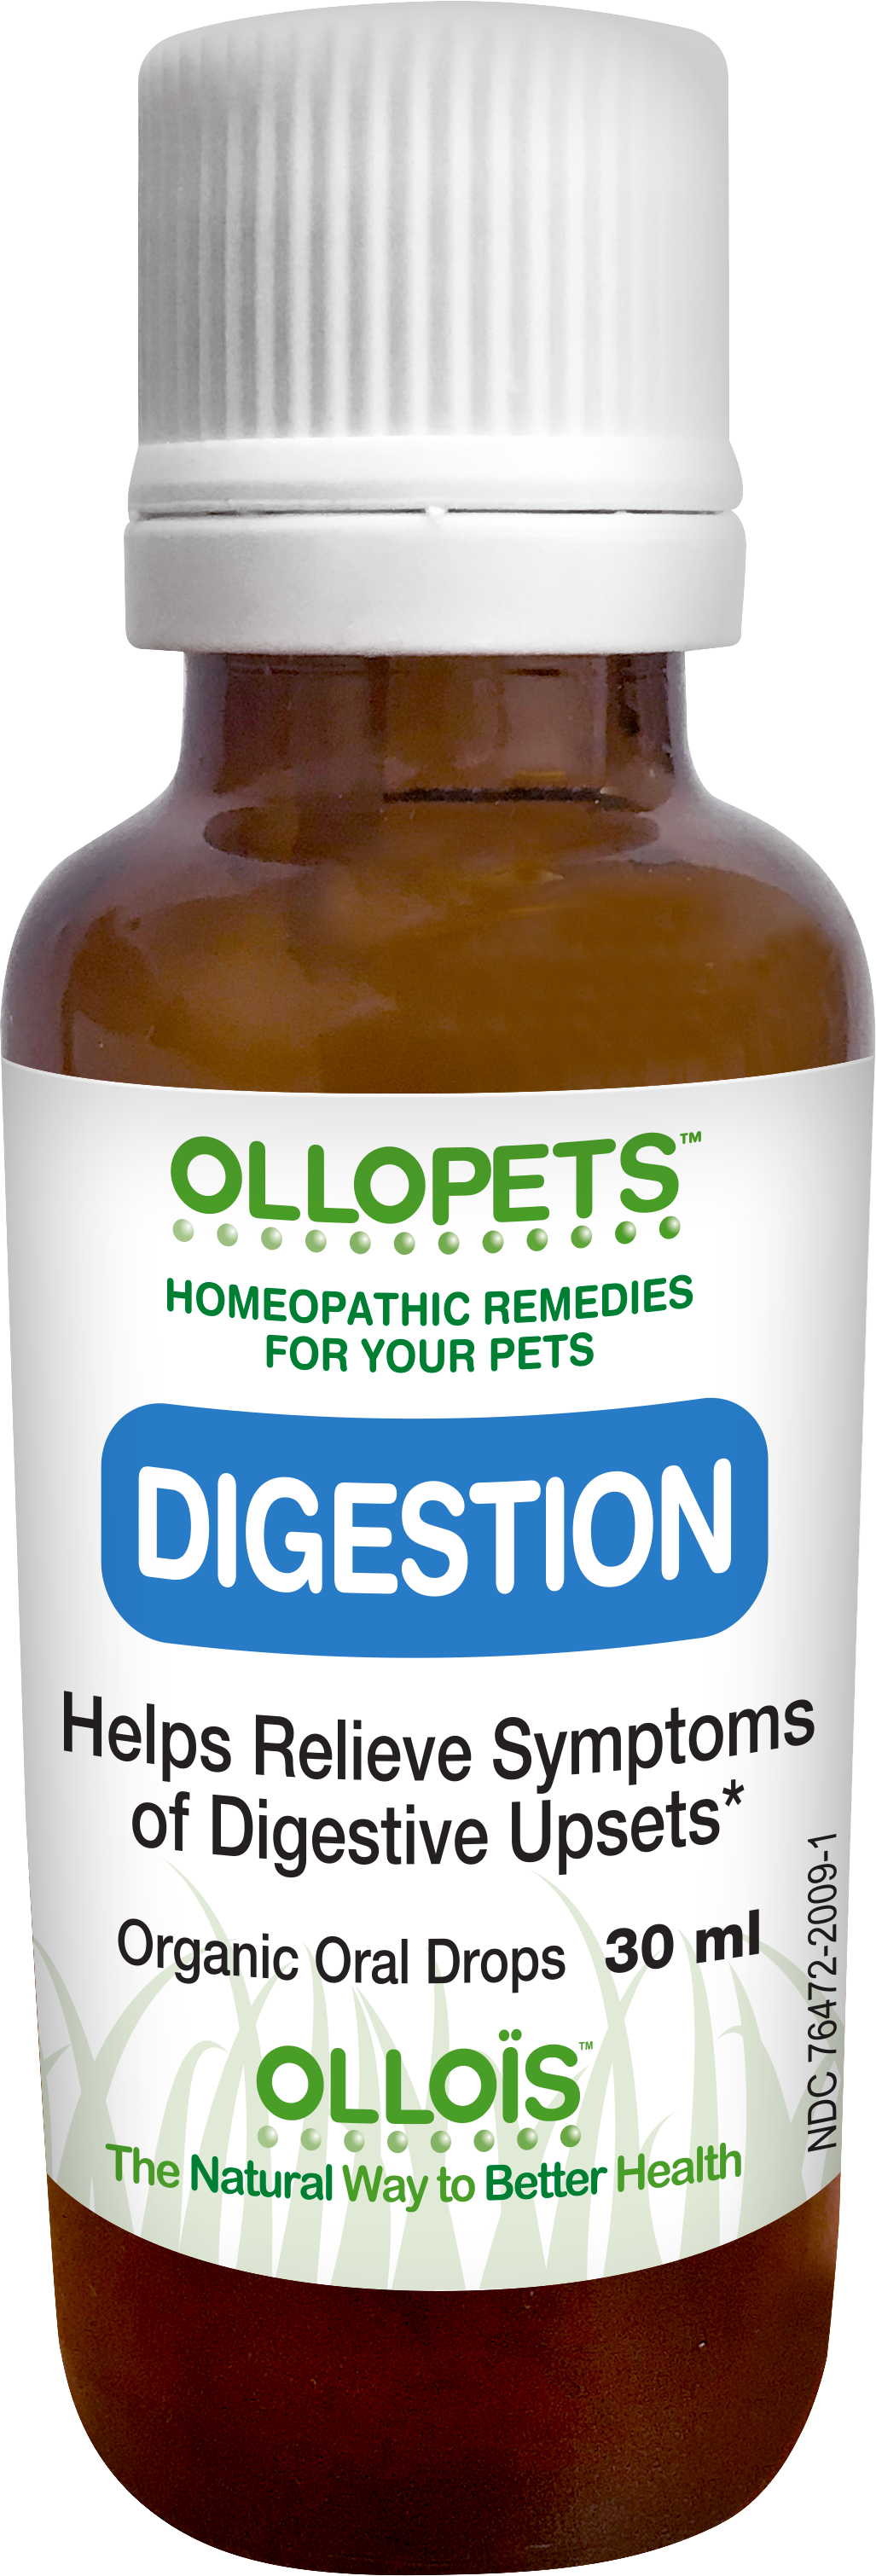 Ollopets Digestion